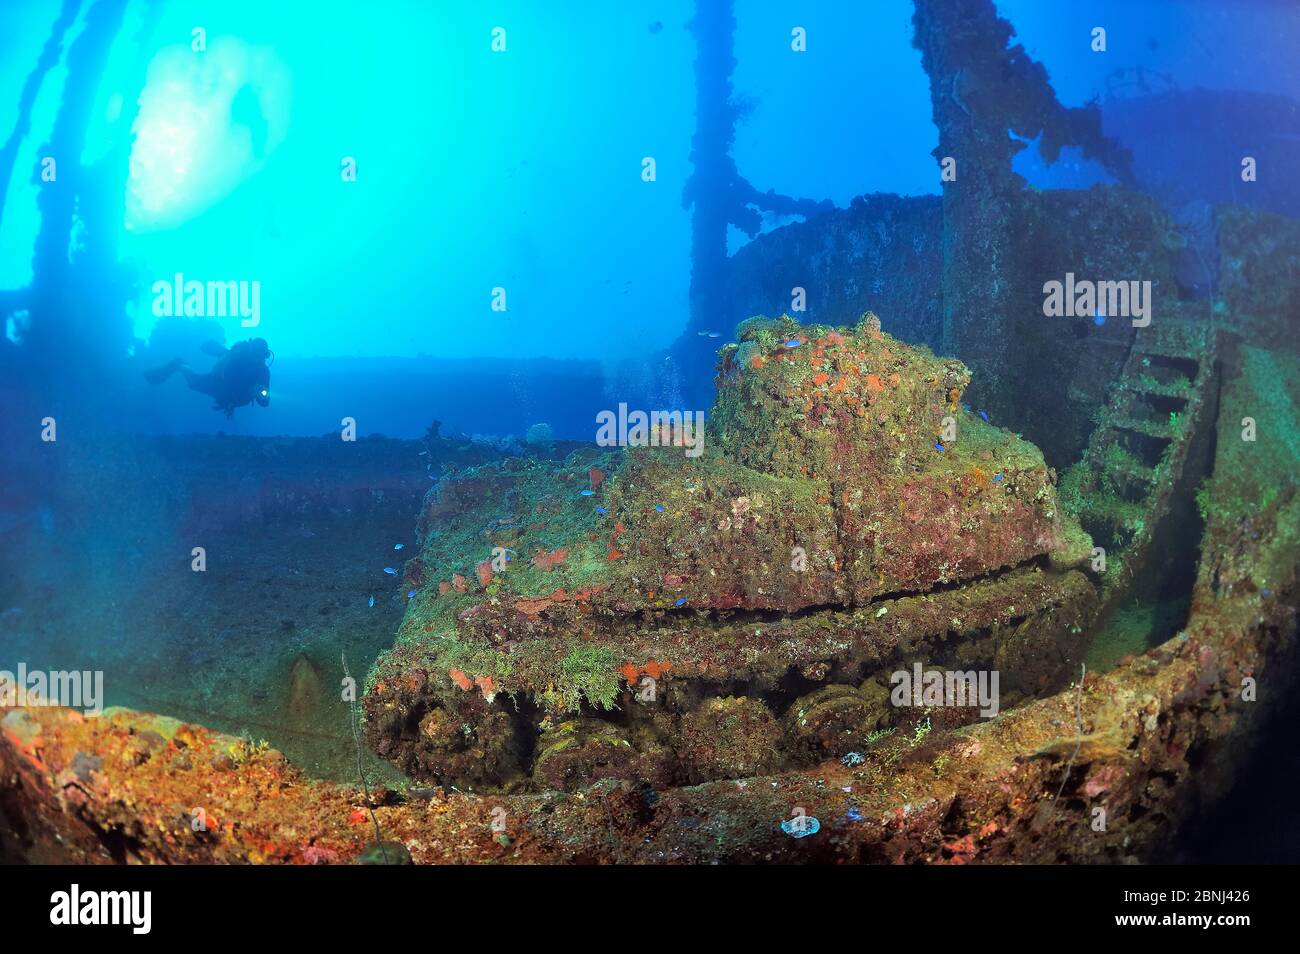 A diver above a tank laying on the deck of the wreck of the Nippo Maru, a cargo ship used as a naval auxiliary, Chuuk or Truk Lagoon, Carolines Island Stock Photo